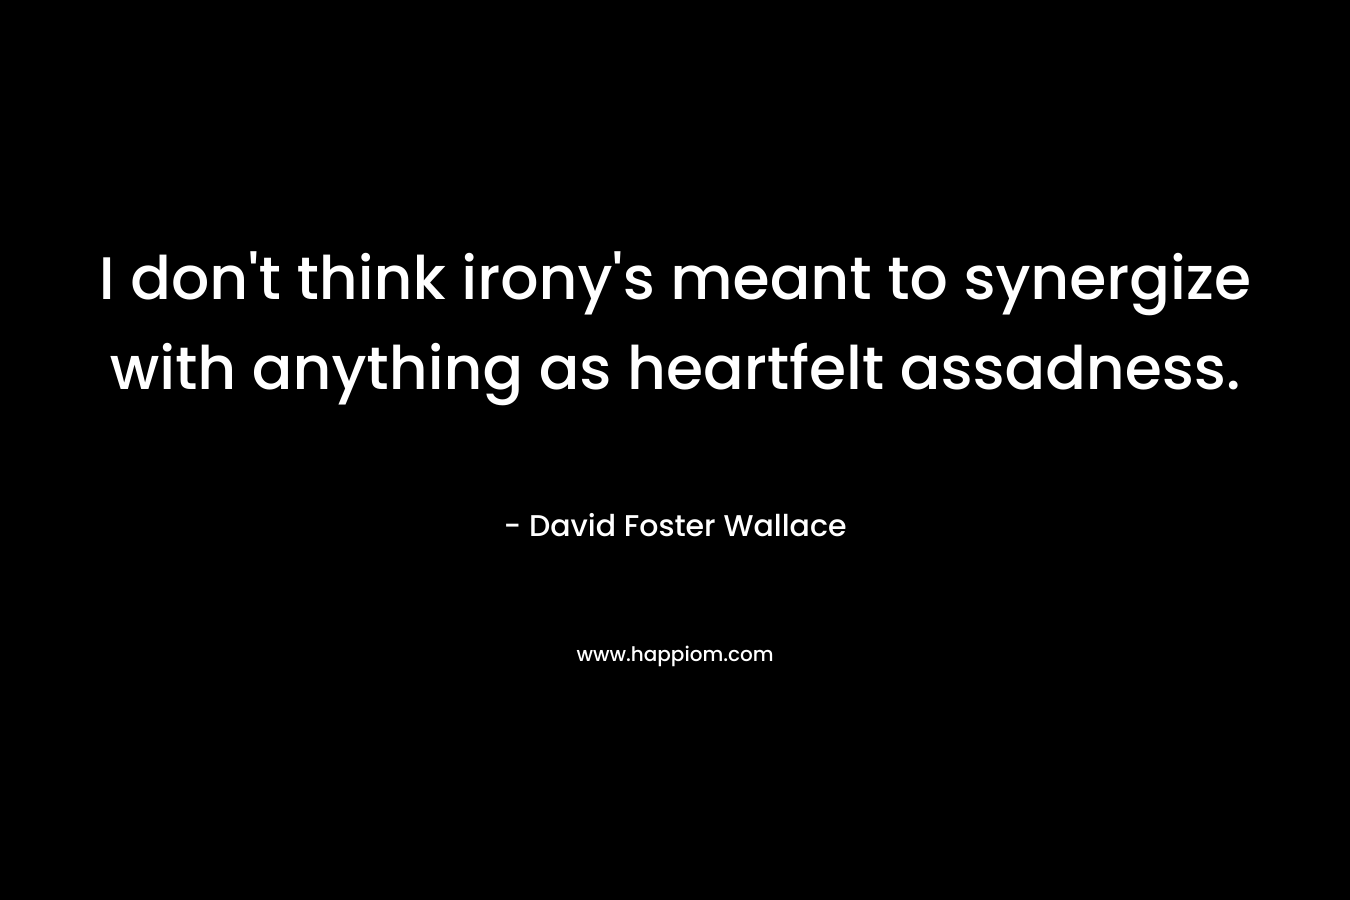 I don’t think irony’s meant to synergize with anything as heartfelt assadness. – David Foster Wallace